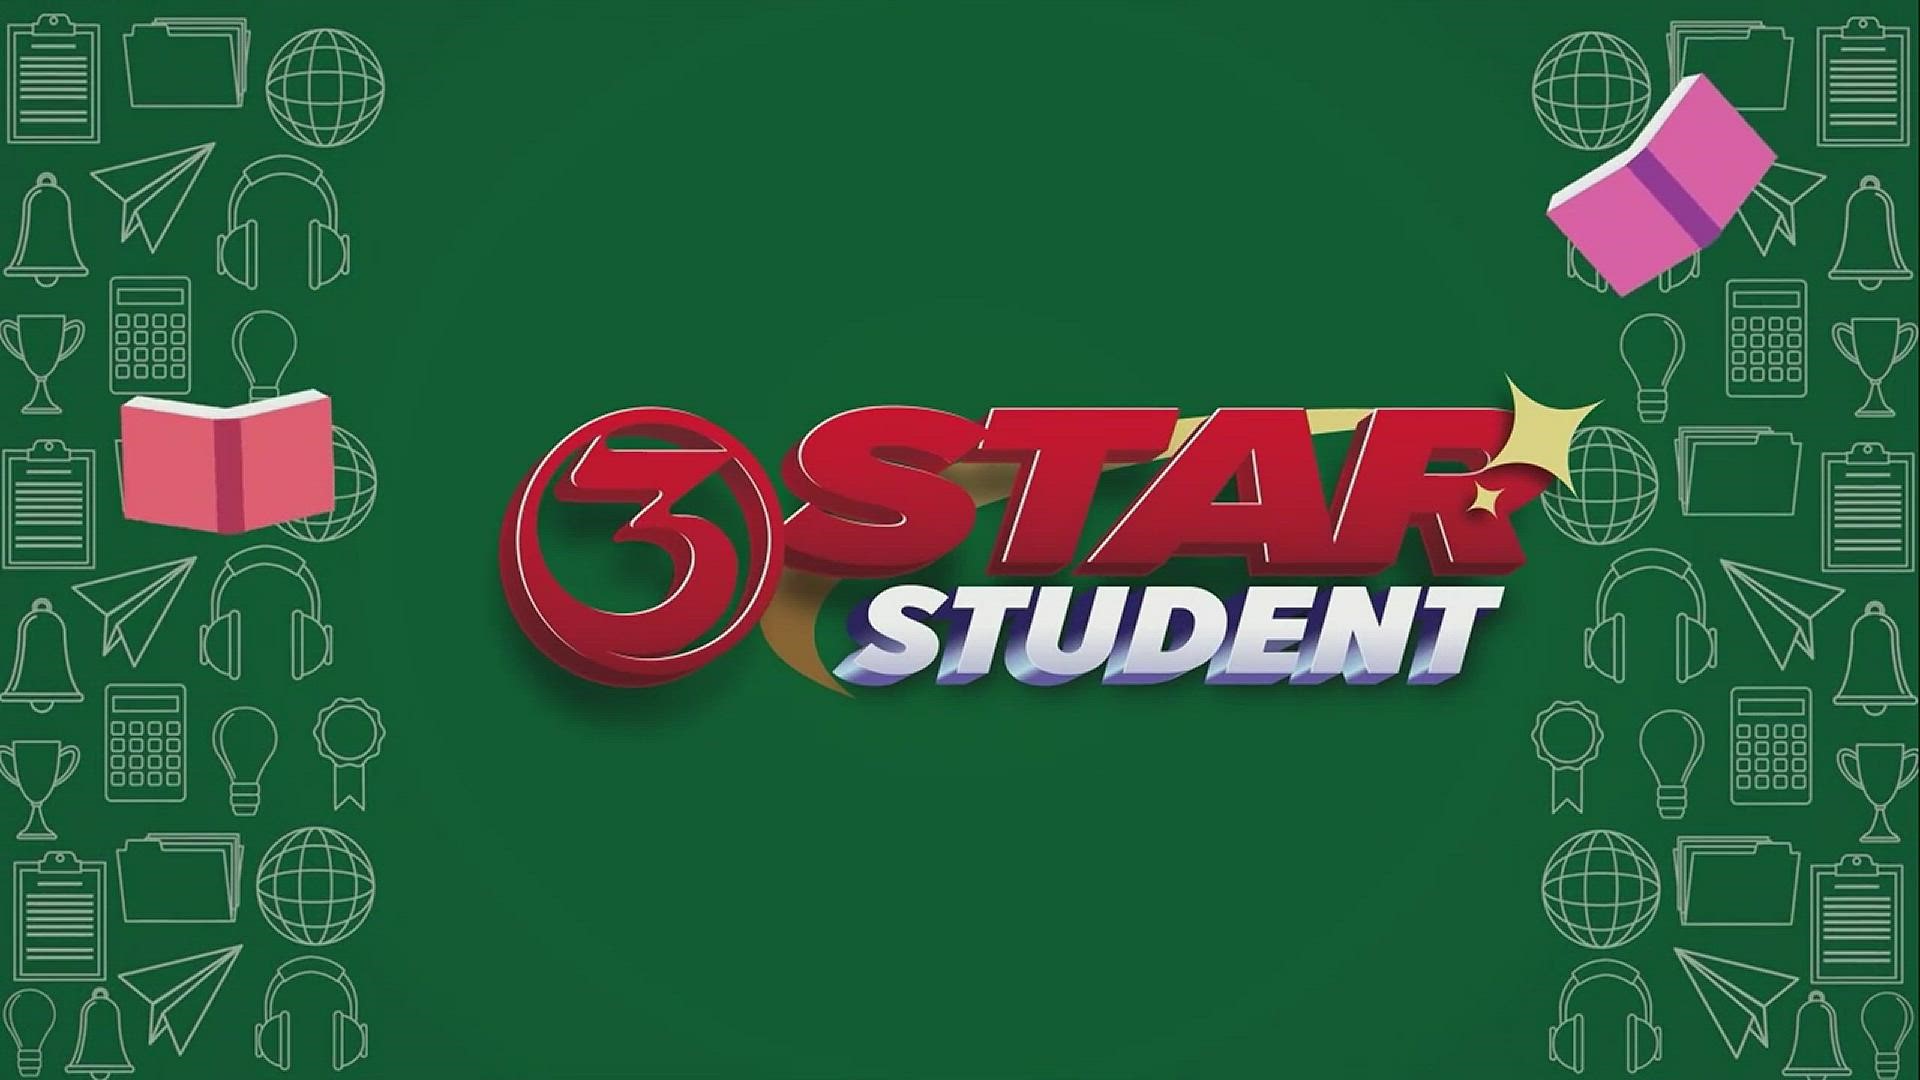 Our 3Star Student of the week is a 5th grader from Harvey Elementary